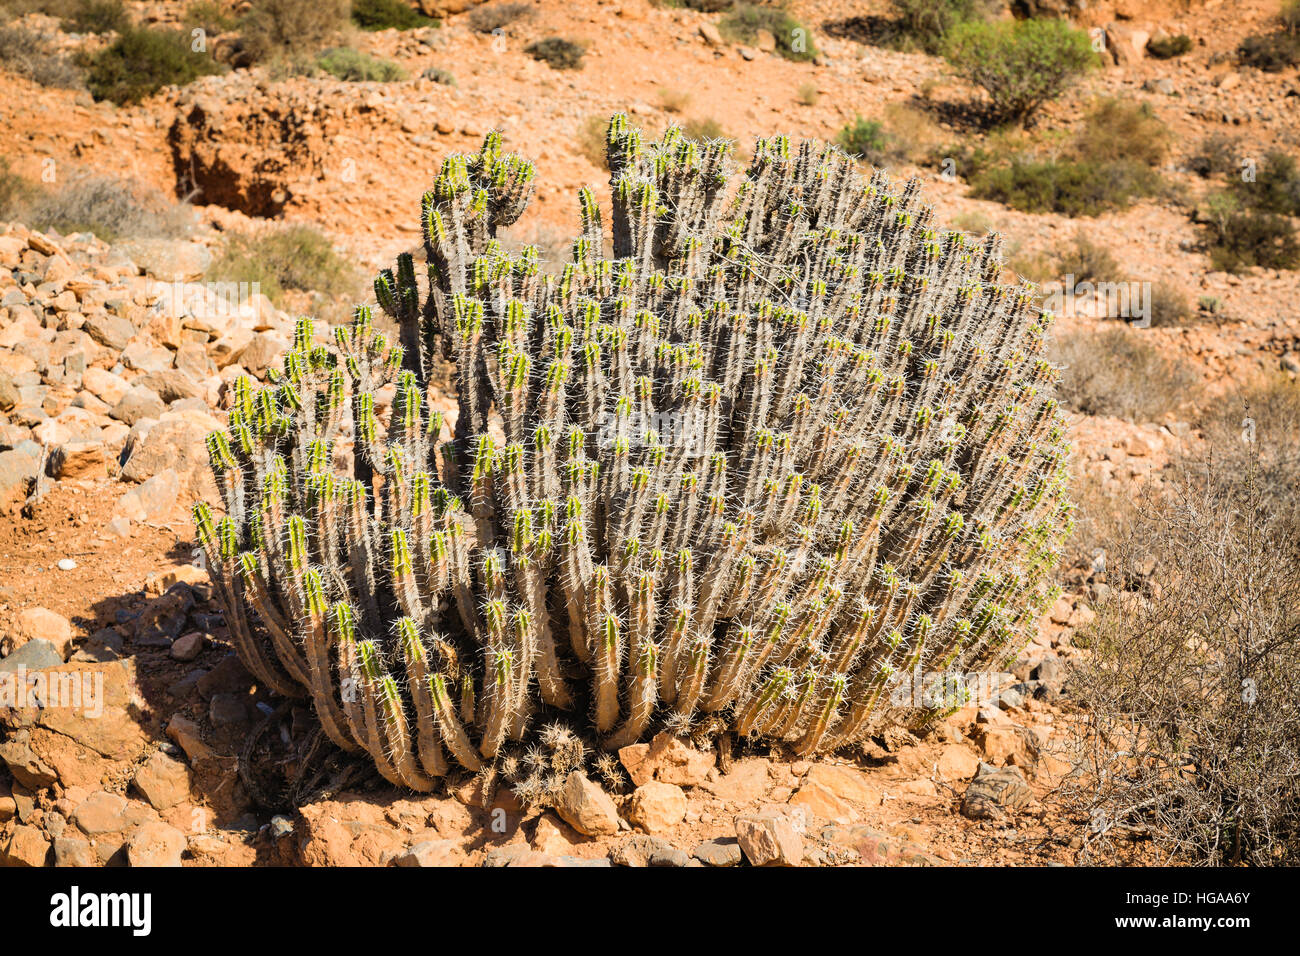 Cactus thrives on rocky hillsides in the mountains of southern Morocco. Stock Photo